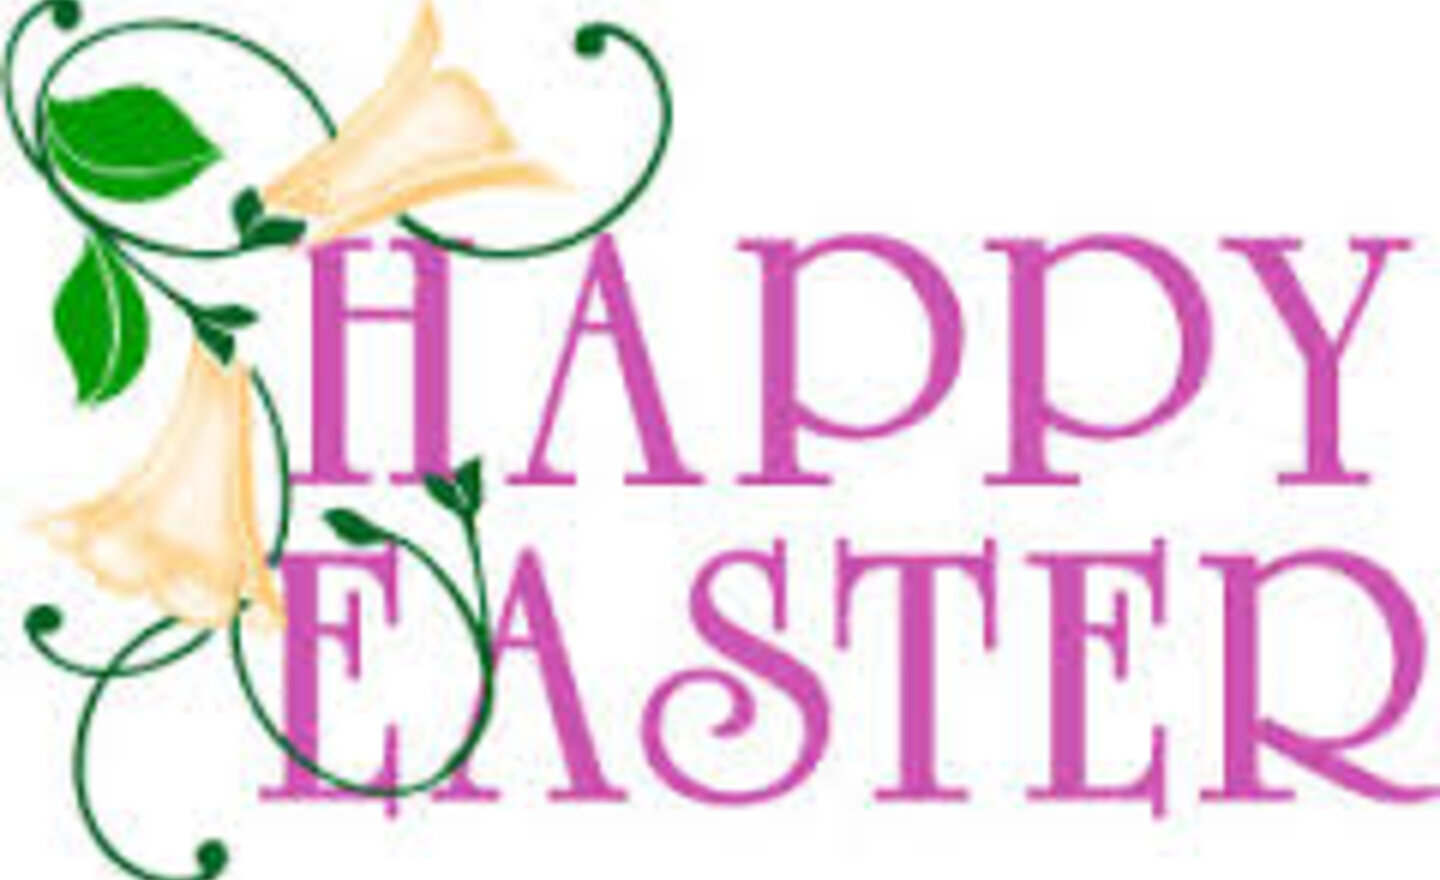 Image of Happy Easter Everyone!